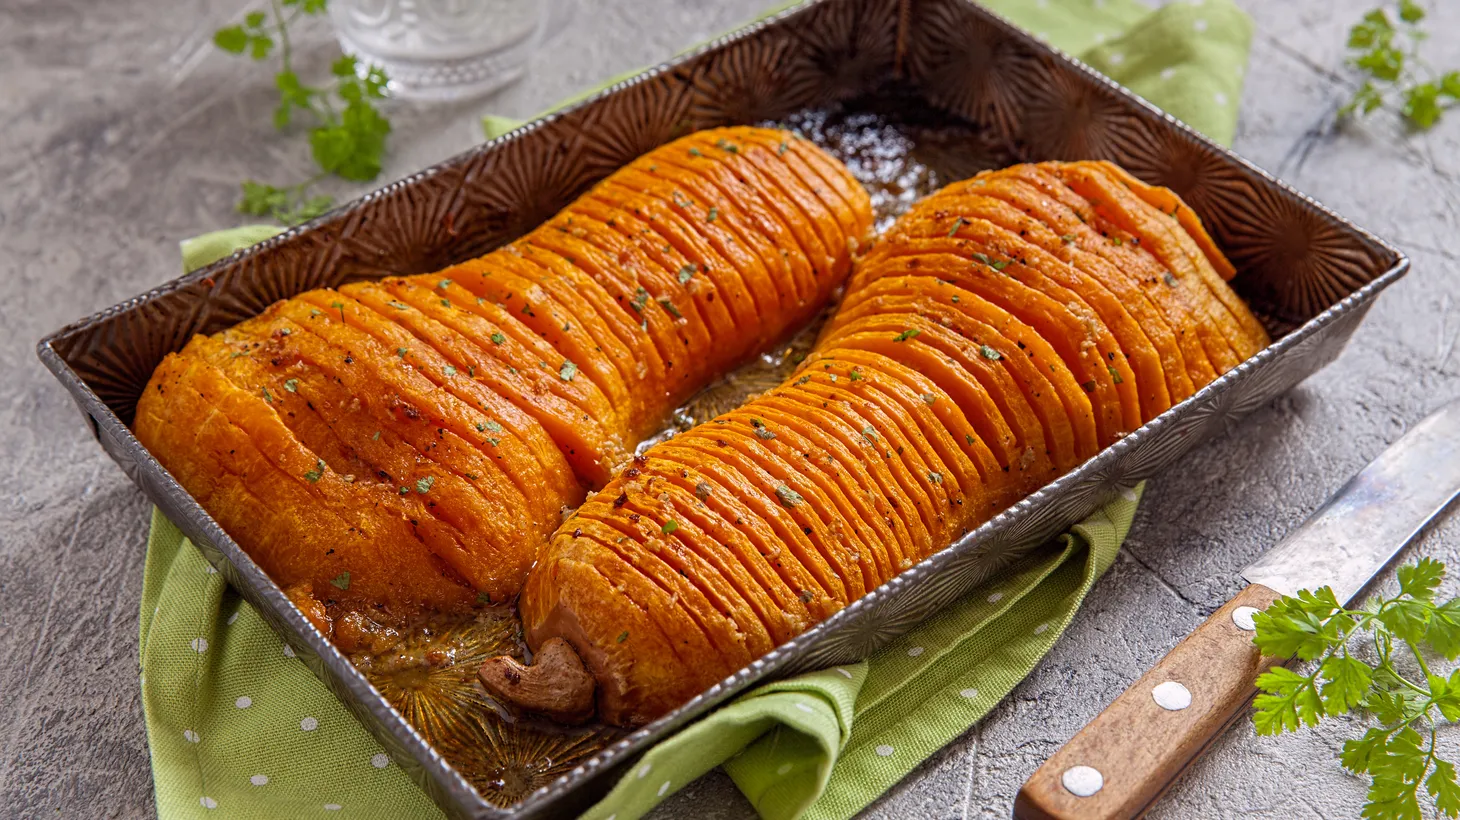 Making a hasselback-style butternut squash is easy and impressive for your holiday table.